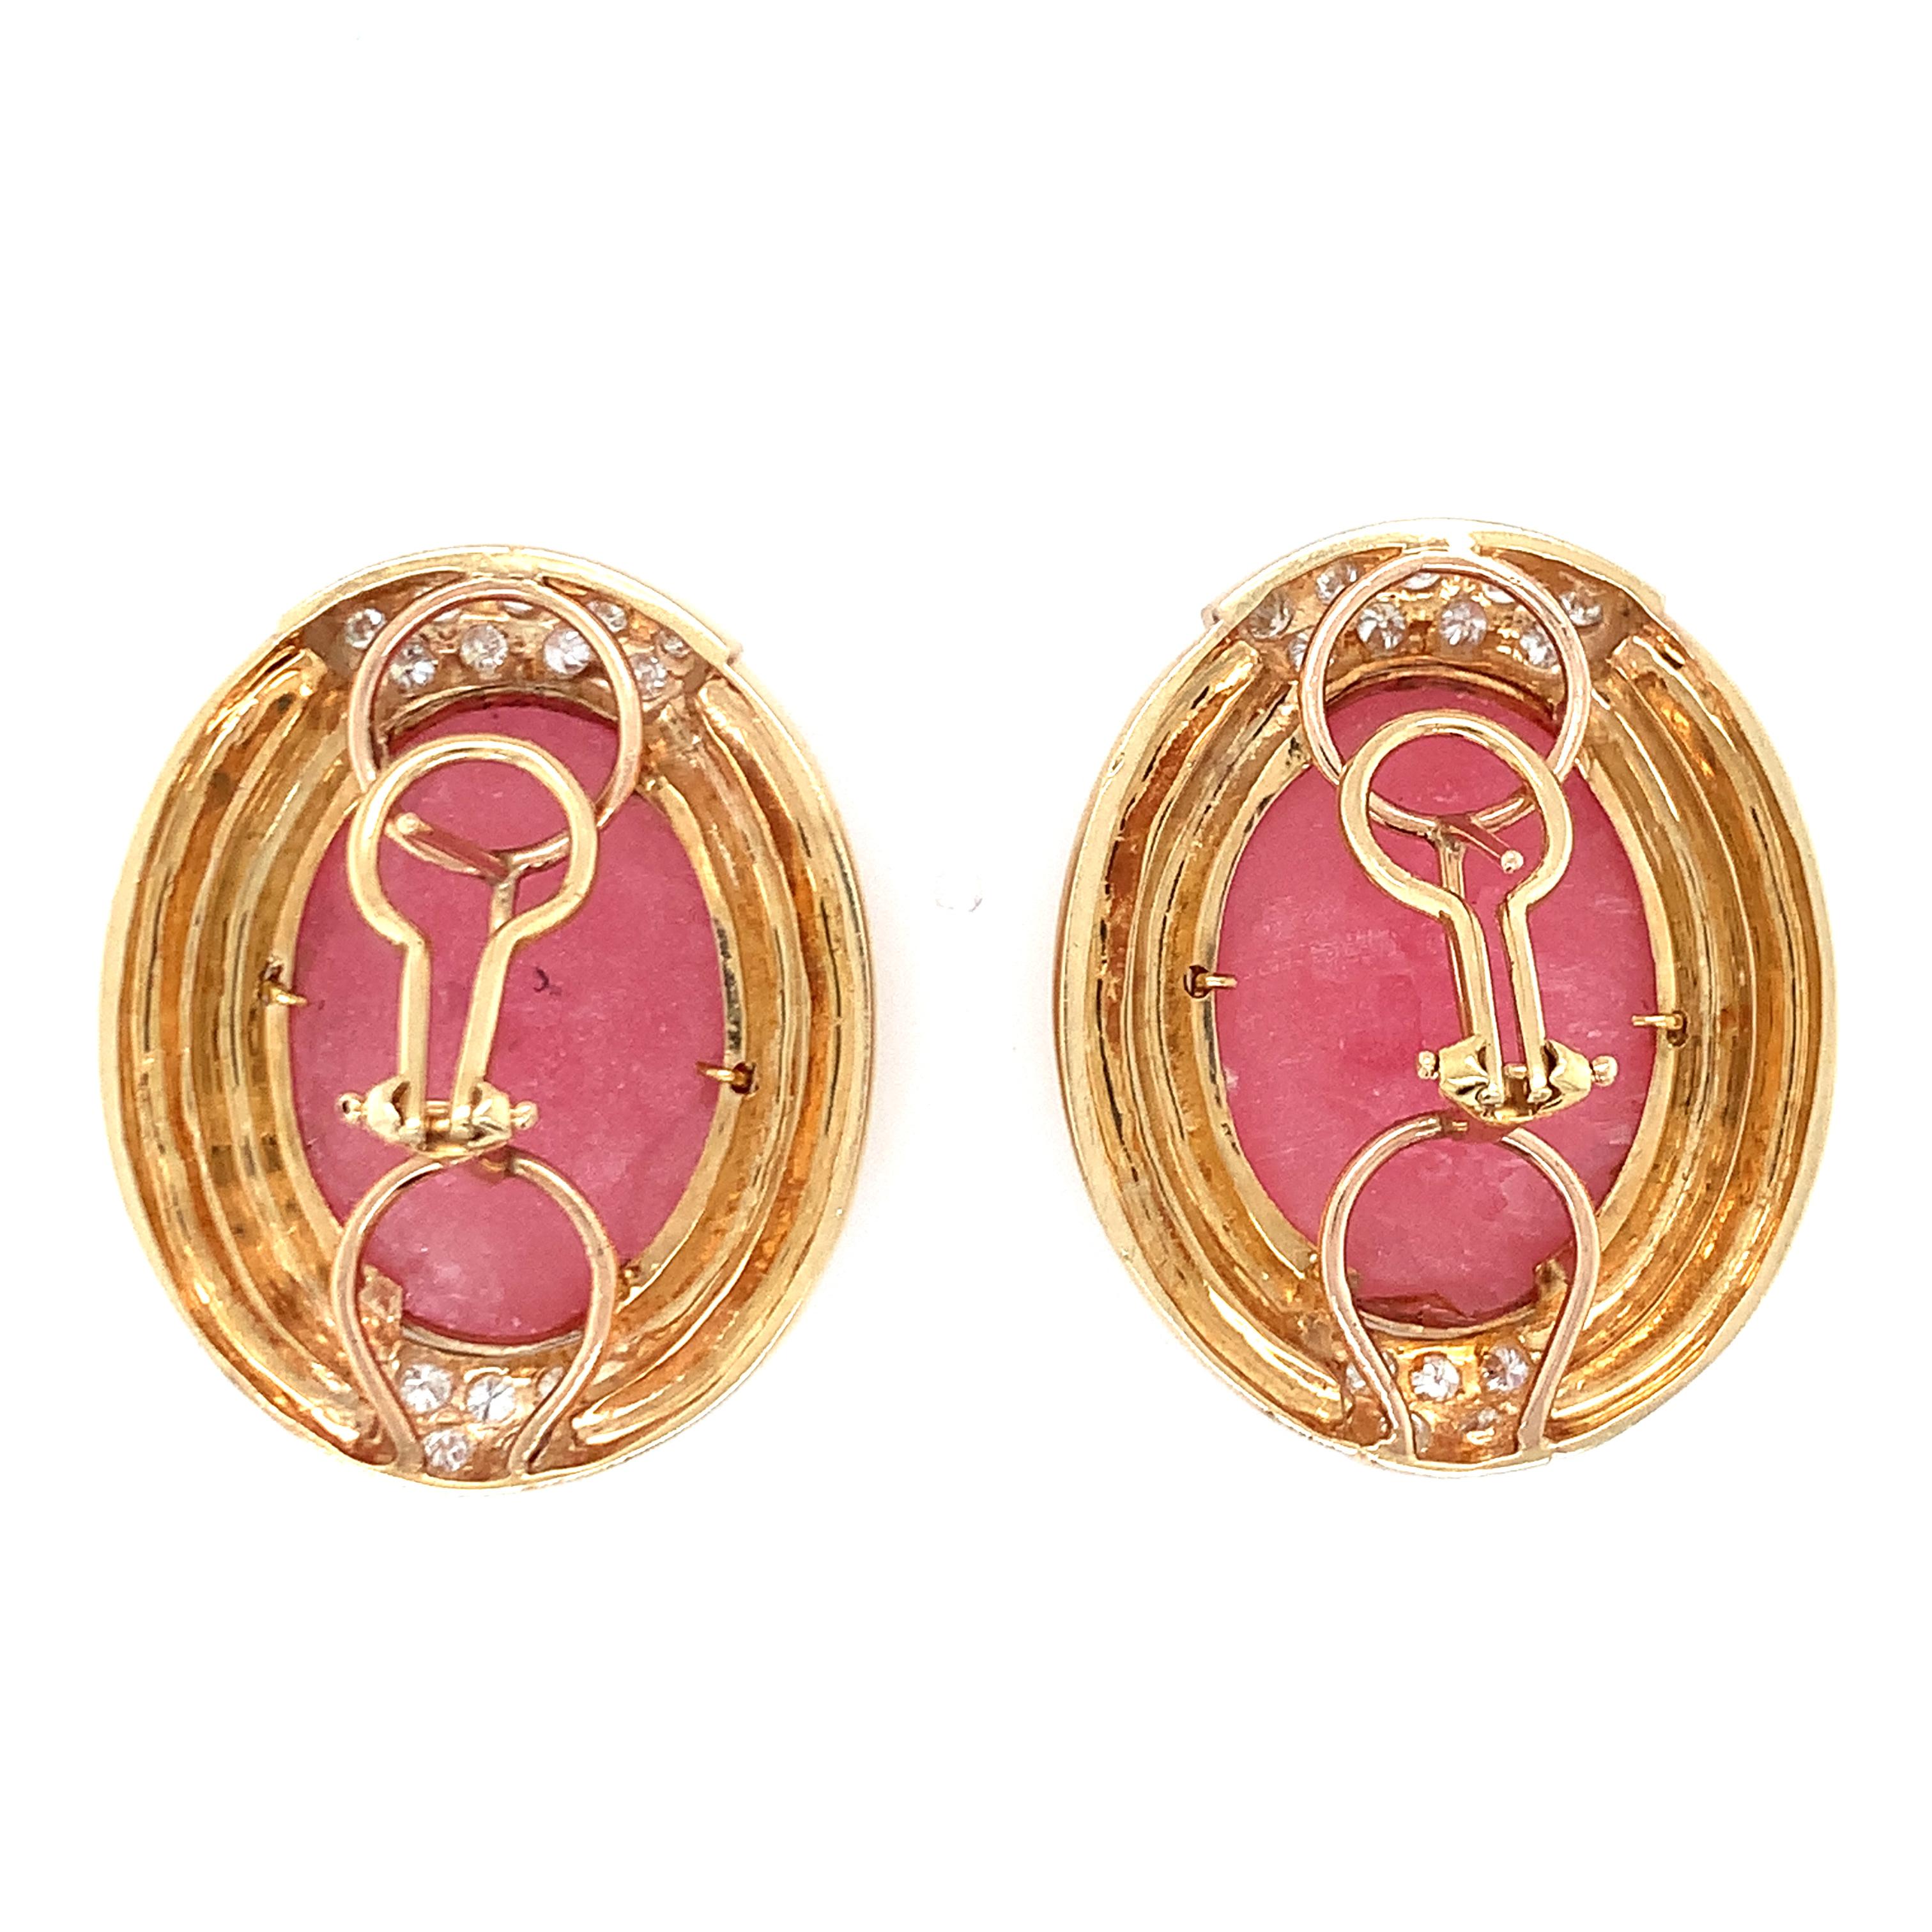 One pair of rhodochrosite and diamond 18k yellow gold earrings featuring 2 oval cabochon rhodochrosite totaling 40 ct. (20 ct. each measuring 23 x 16.5 millimeters) with 28 round brilliant cut diamonds totaling 1.25 ct. Enhanced by 14K yellow gold